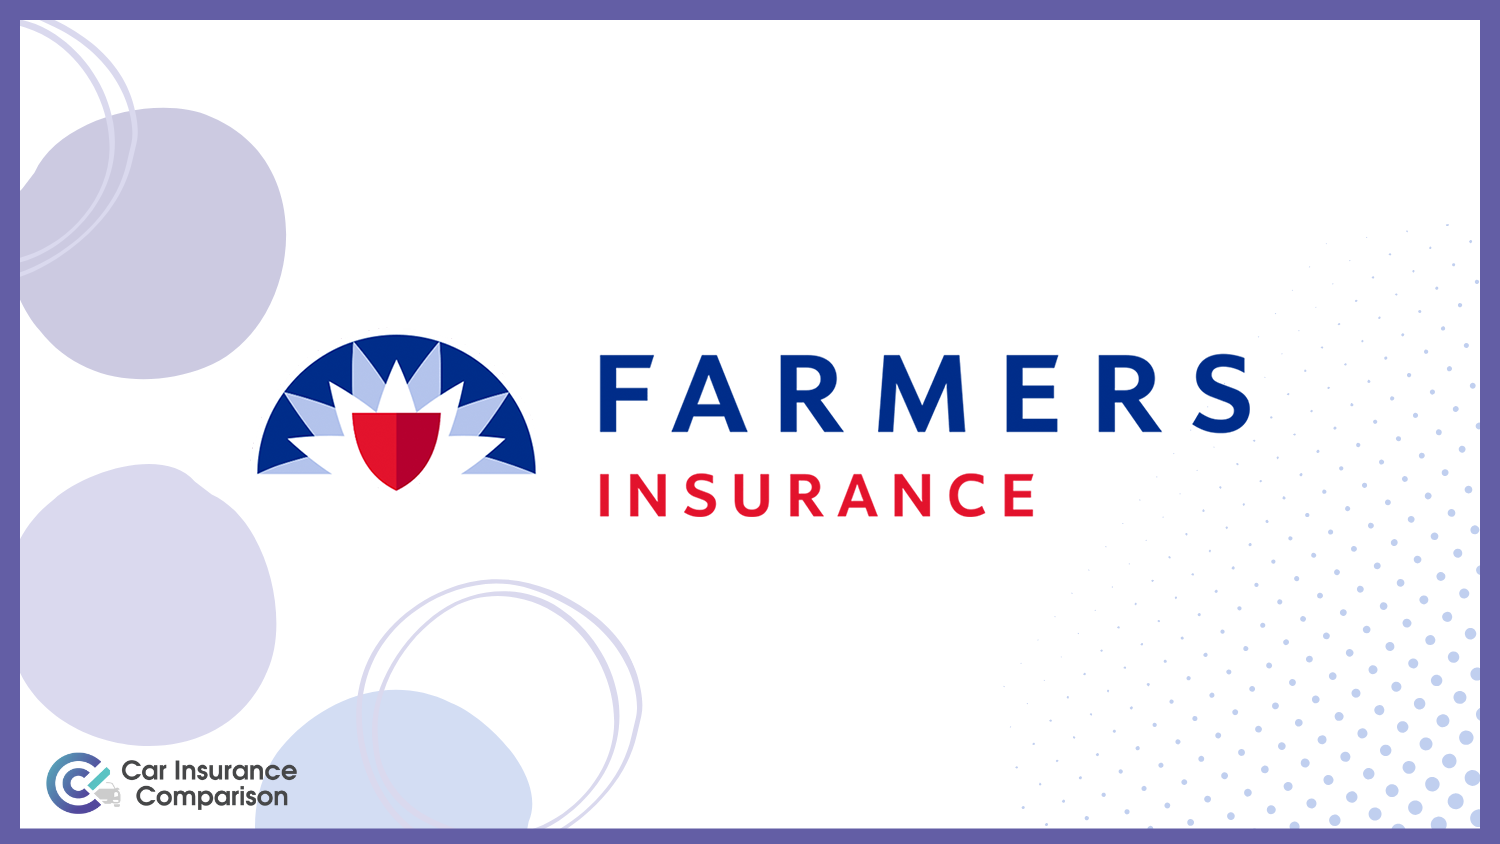 Farmers: Best Car Insurance for Real Estate Agents